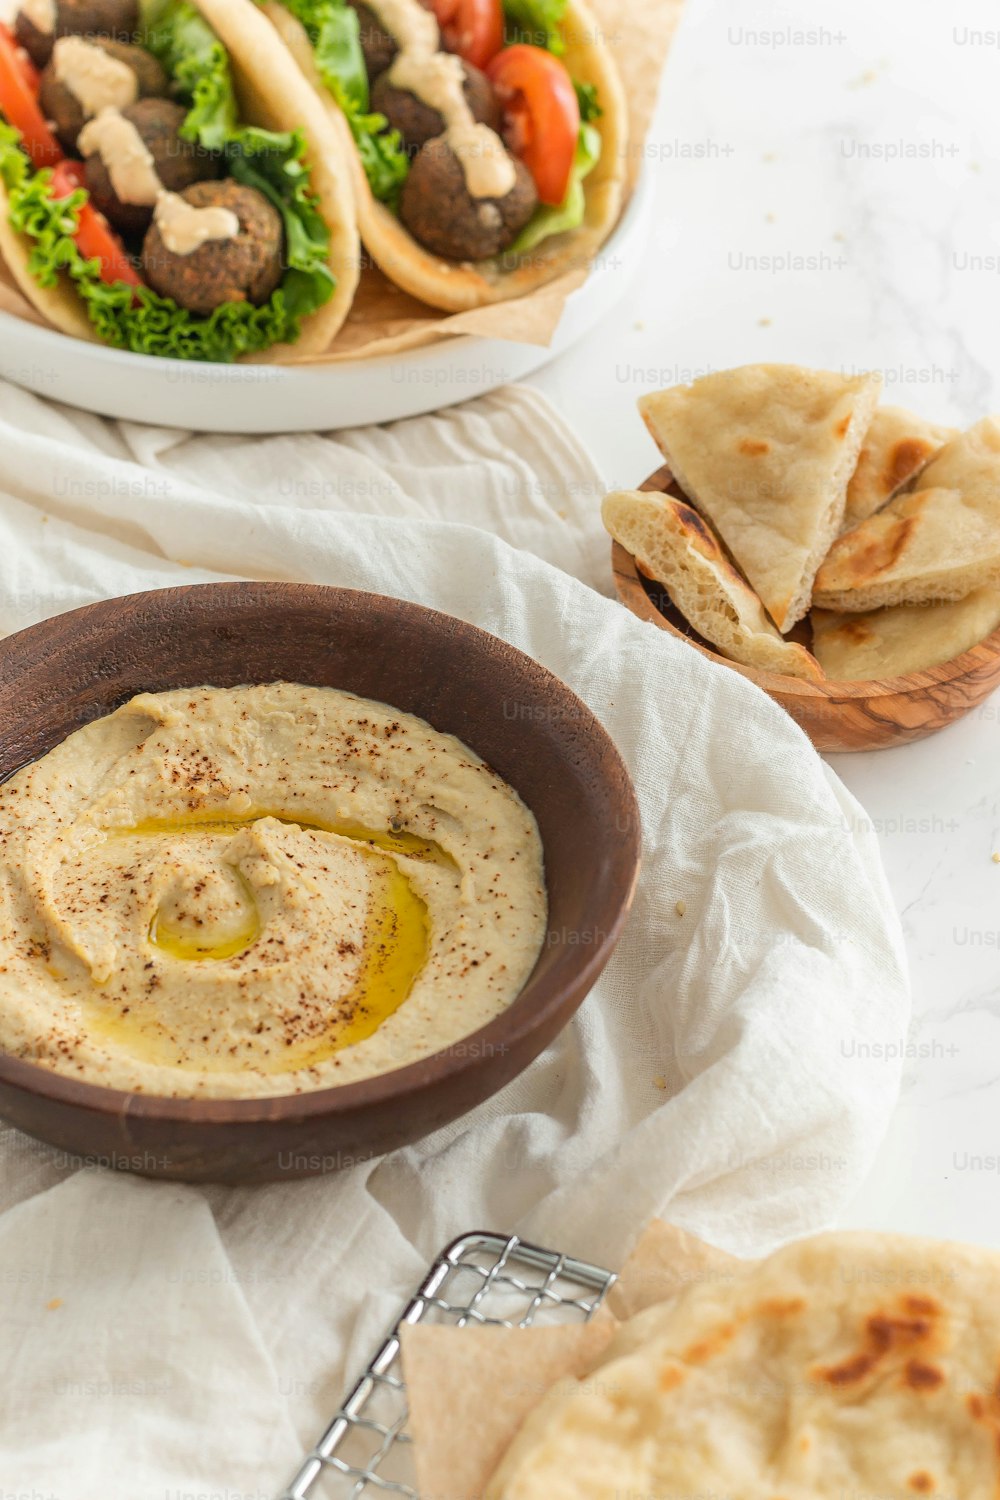 a bowl of hummus and pita bread on a table